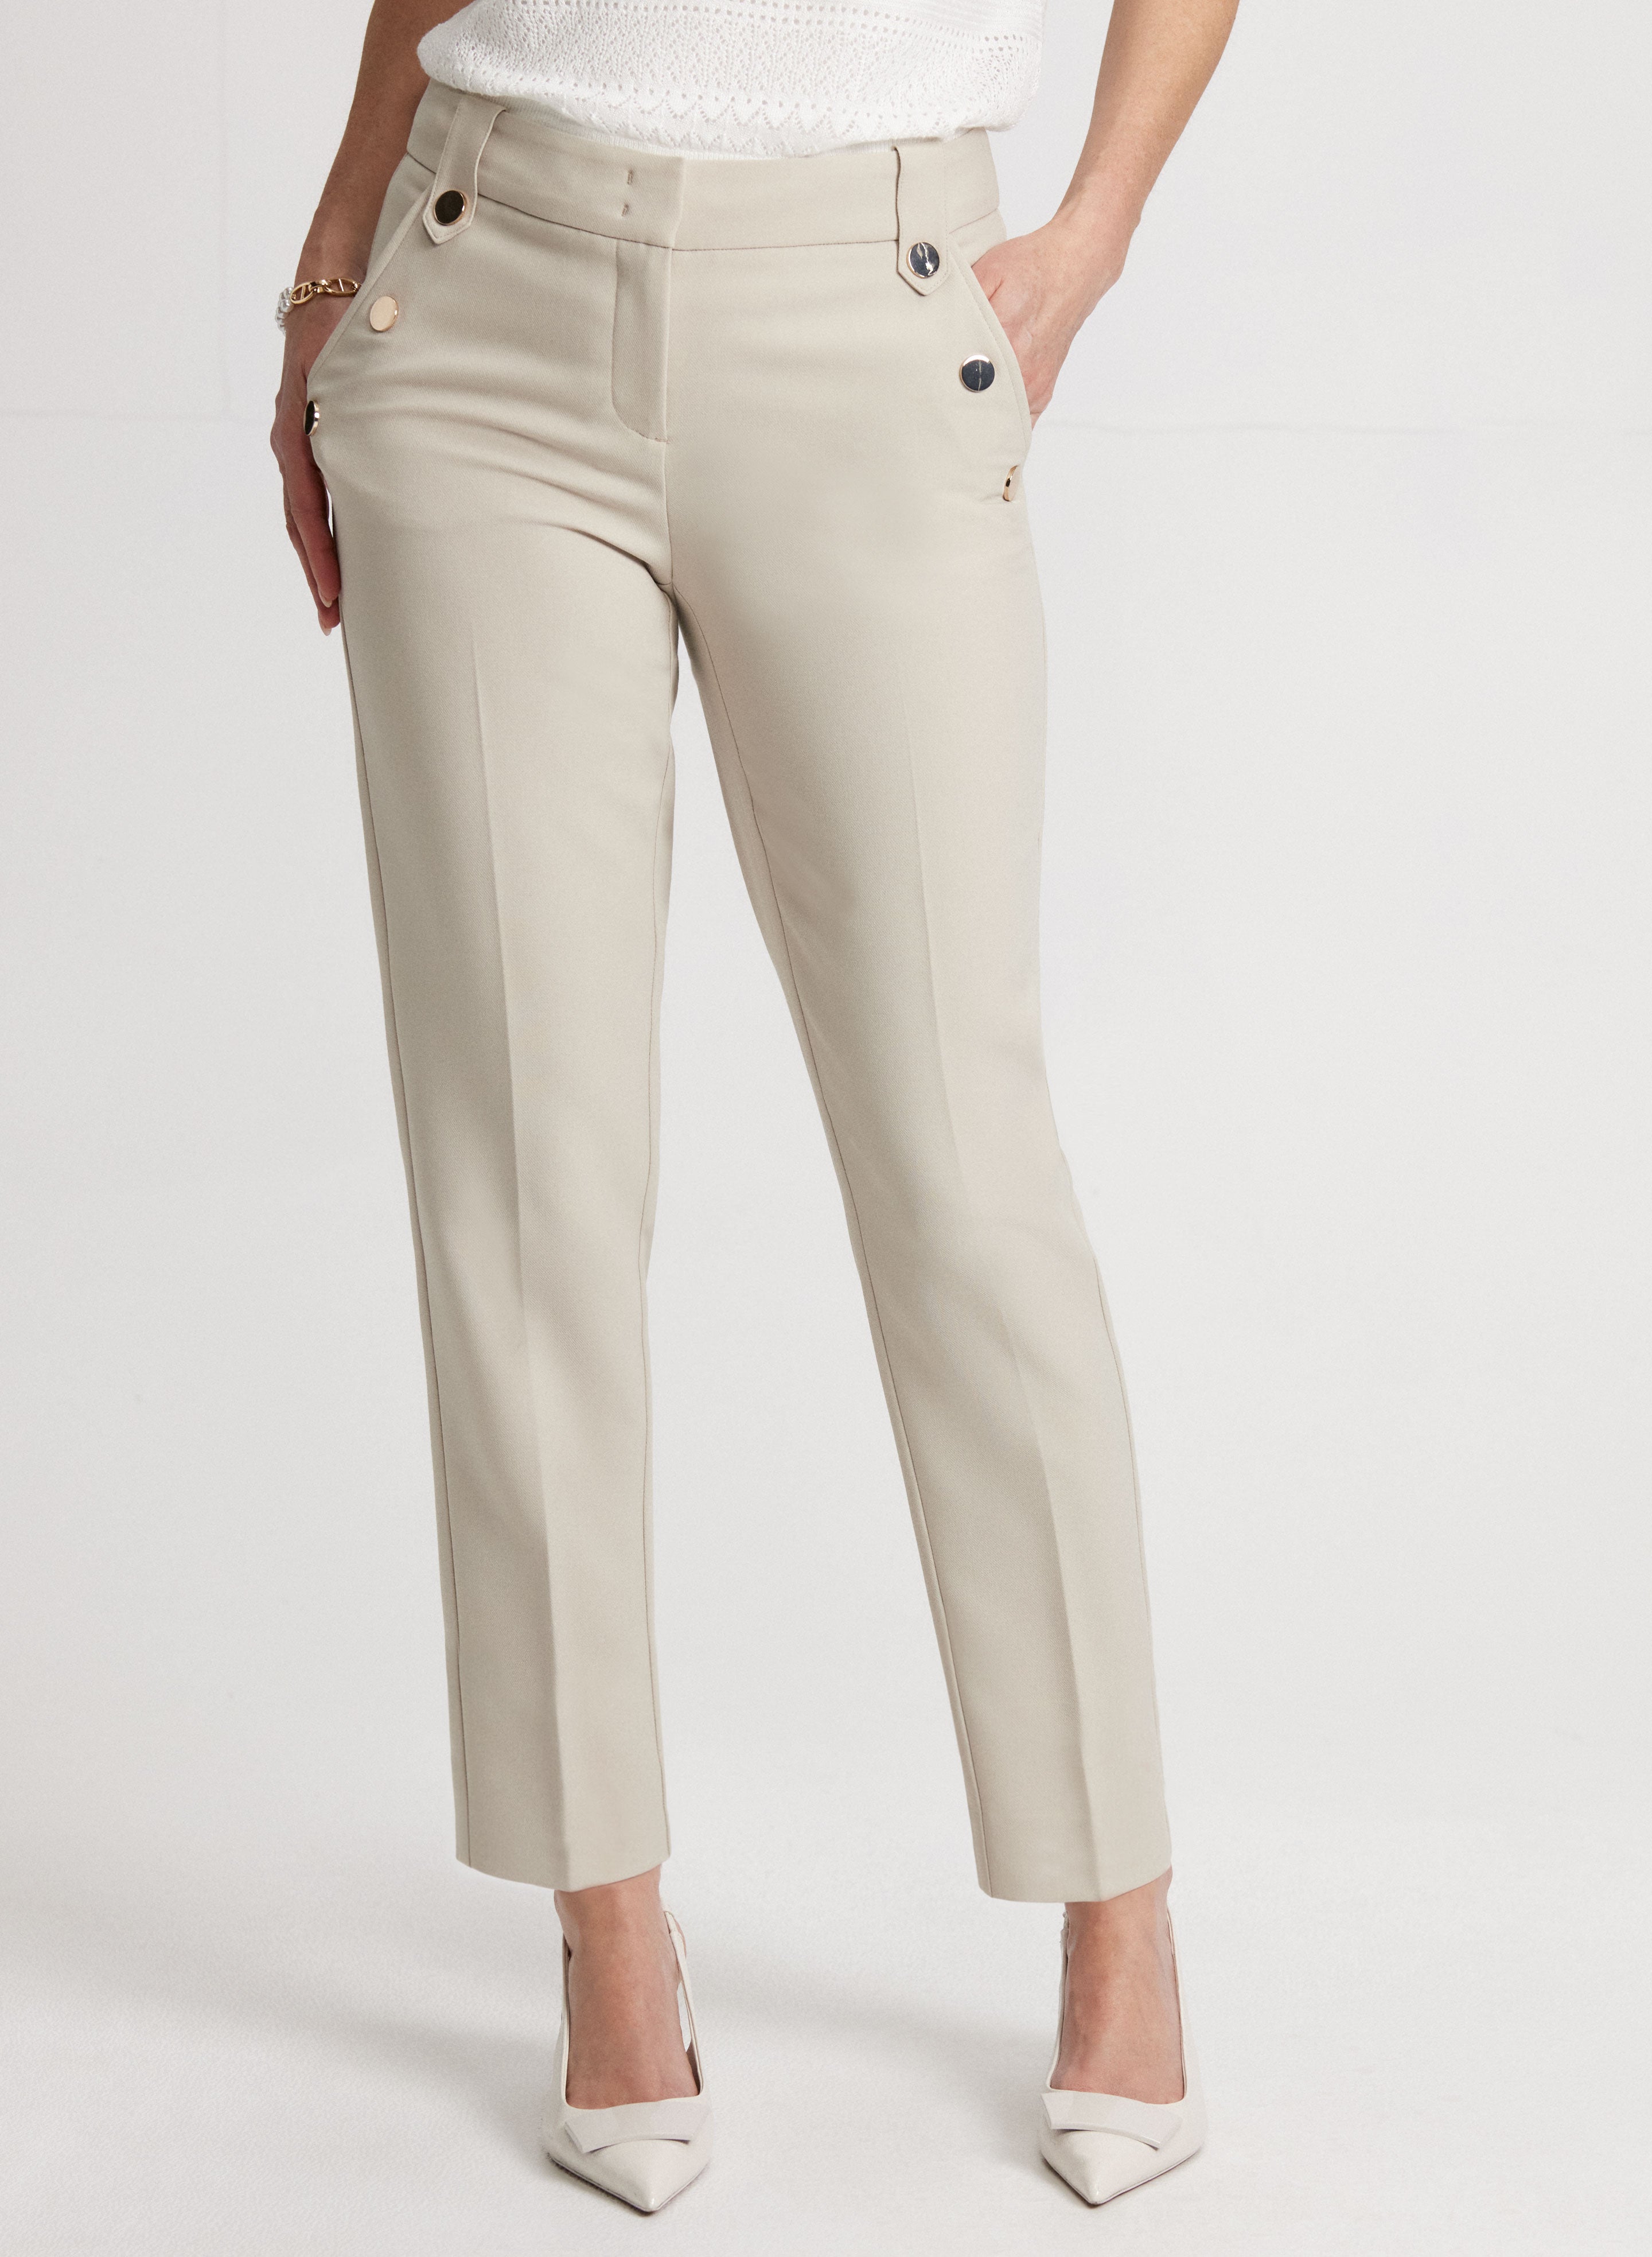 Beige Ankle-length Pants for Women with drawstring Waist and Lace